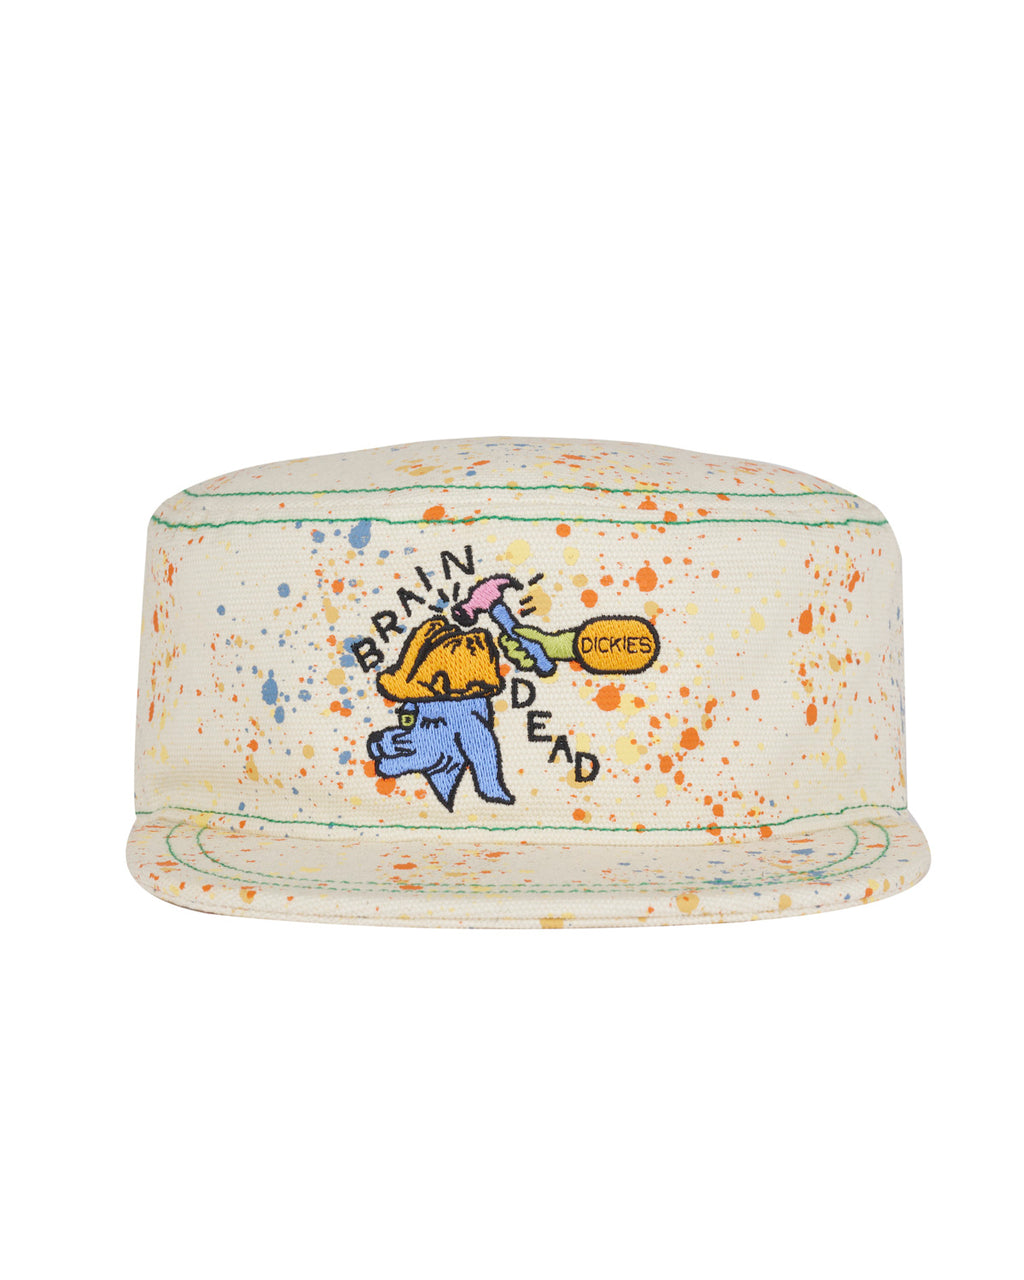 Dickies Embroidered Painters Cap - White Splatter 1